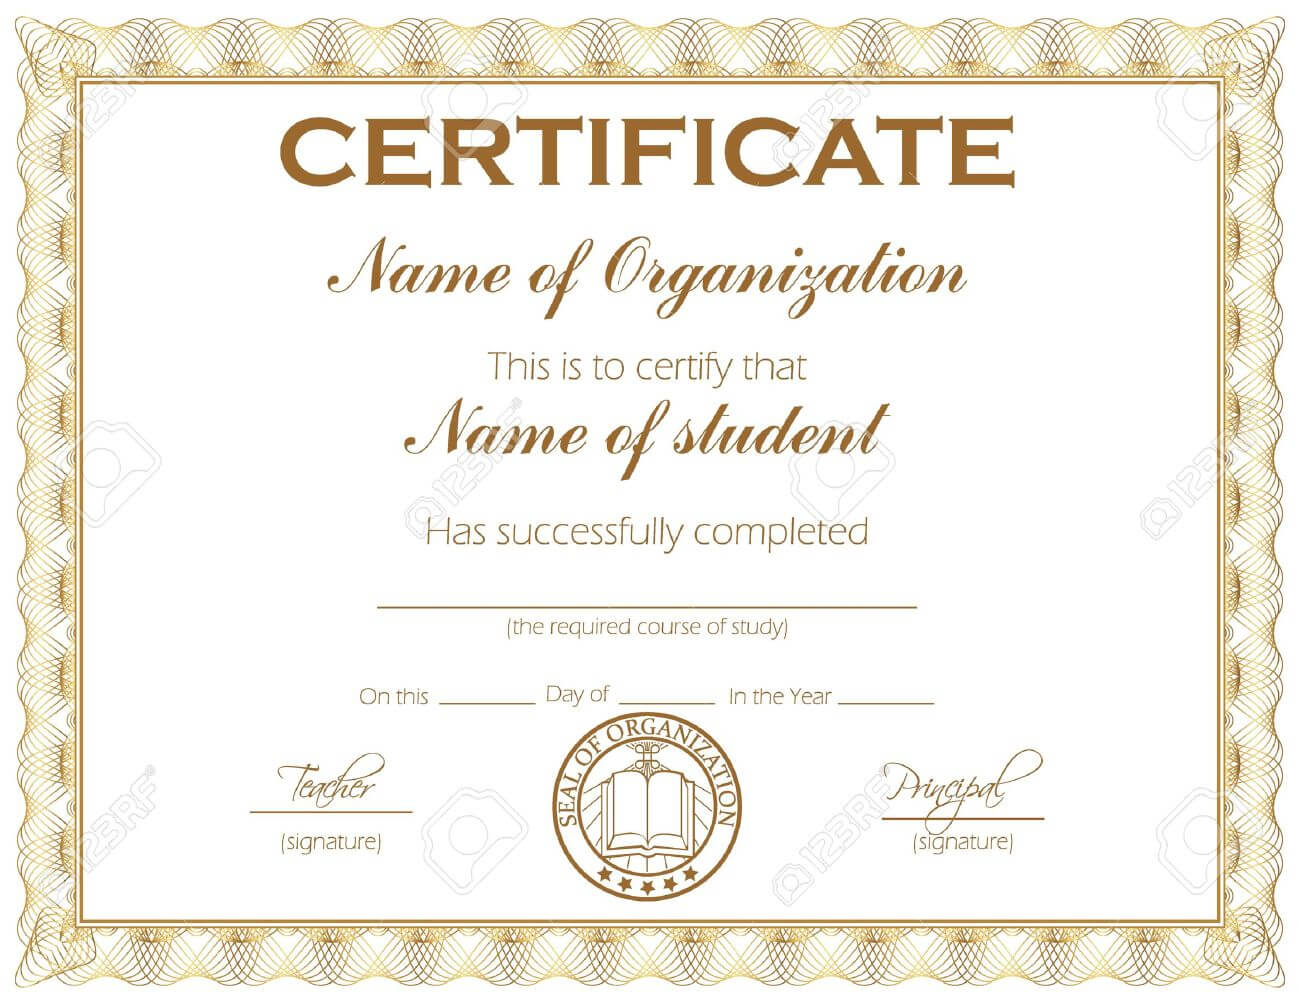 General Purpose Certificate Or Award With Sample Text That Can.. Intended For Student Of The Year Award Certificate Templates